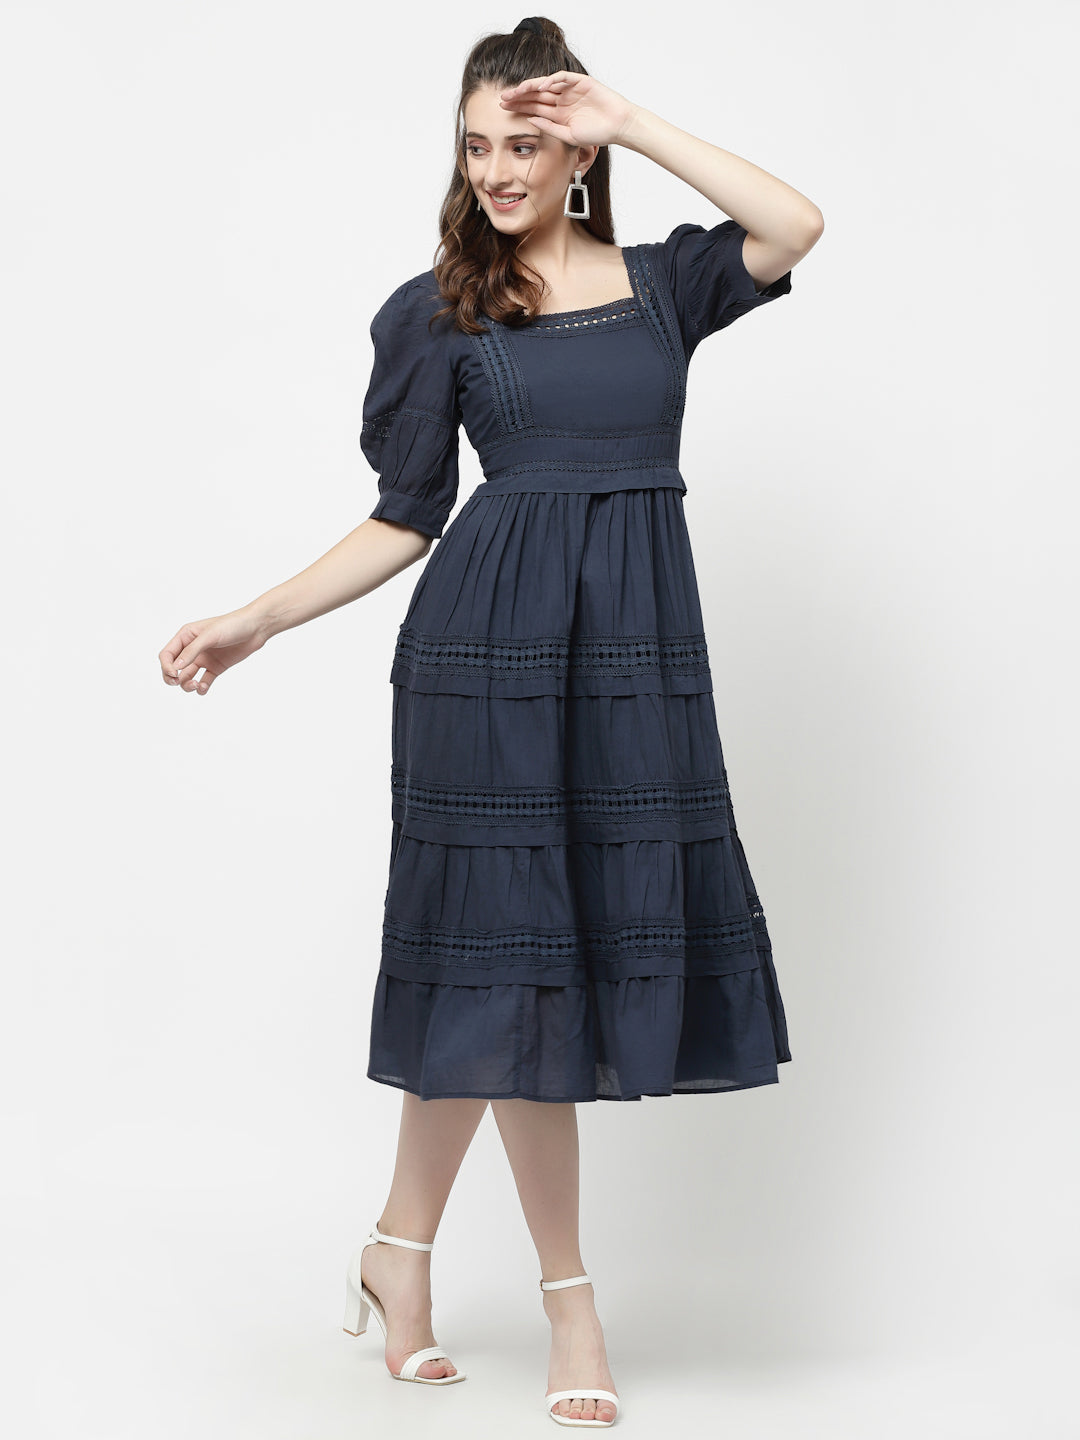 Terquois Self-Design Casual Dress with Antique Lace Dresses TERQUOIS   